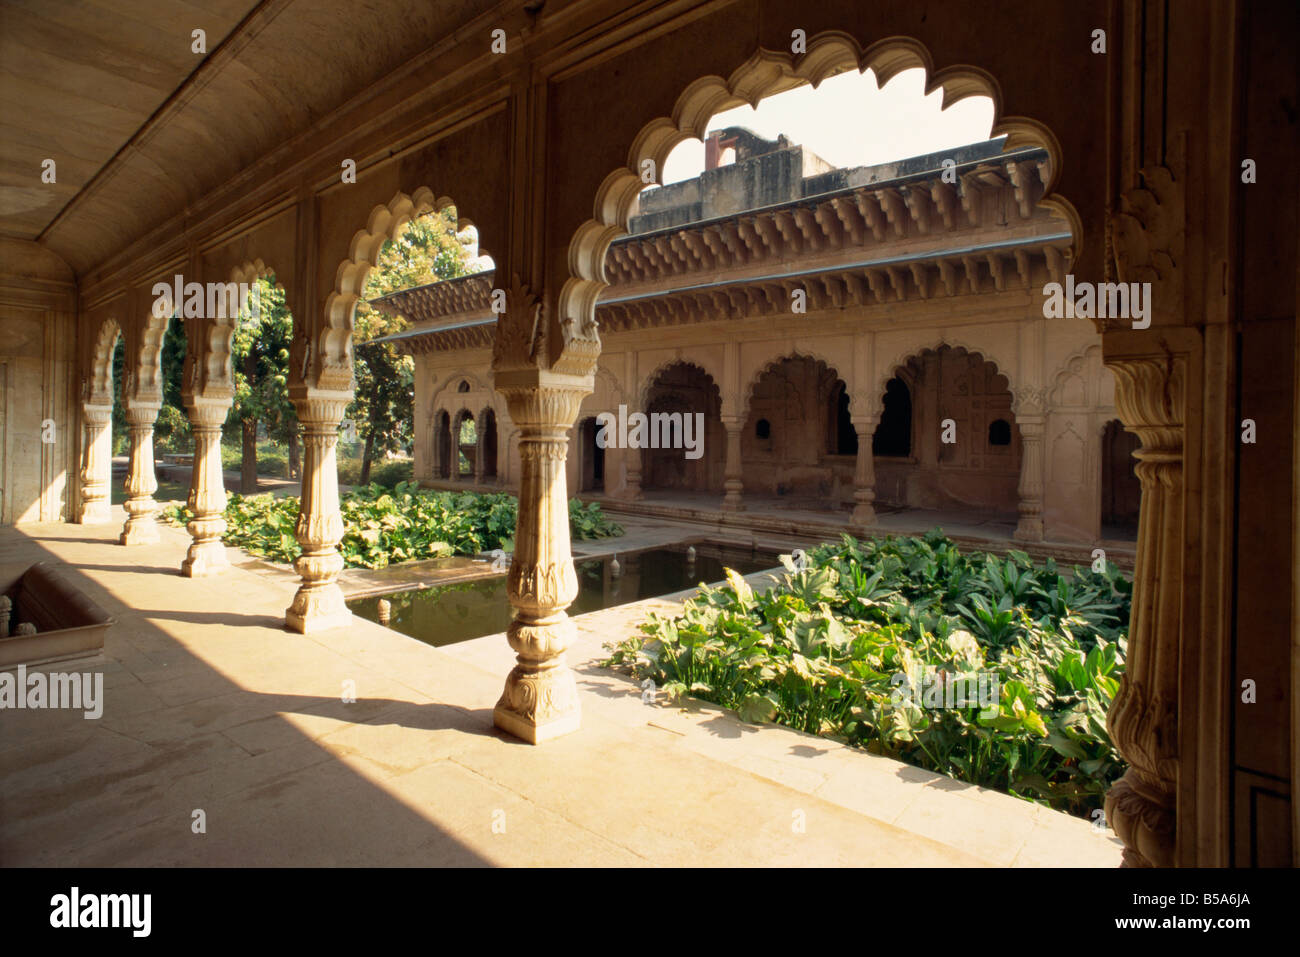 Summer Palace built in 1768 with over 2000 fountains Deeg Rajasthan state India Asia Stock Photo